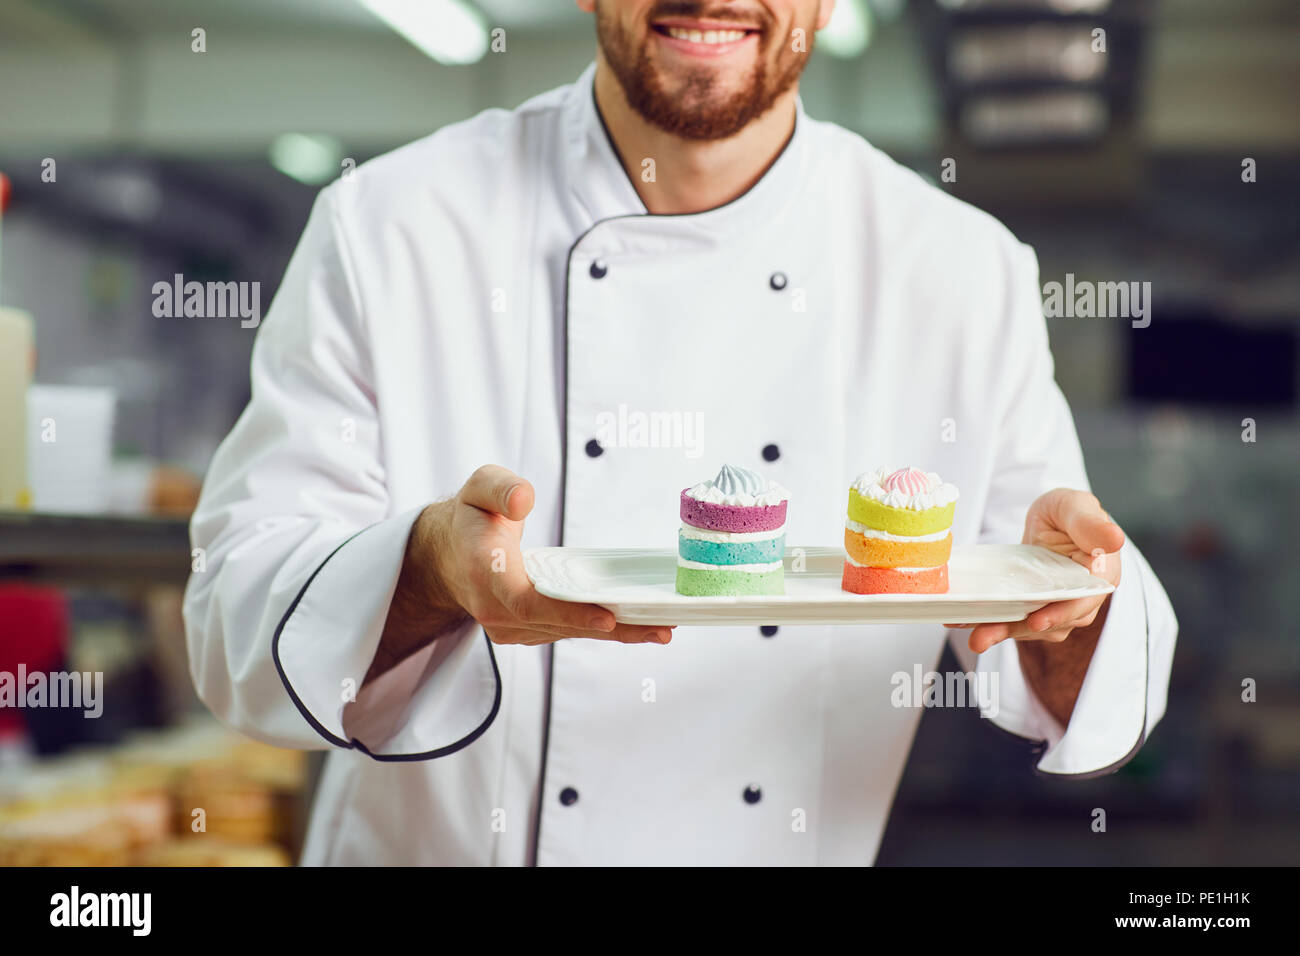 A confectioner with dessert in his hands. Stock Photo